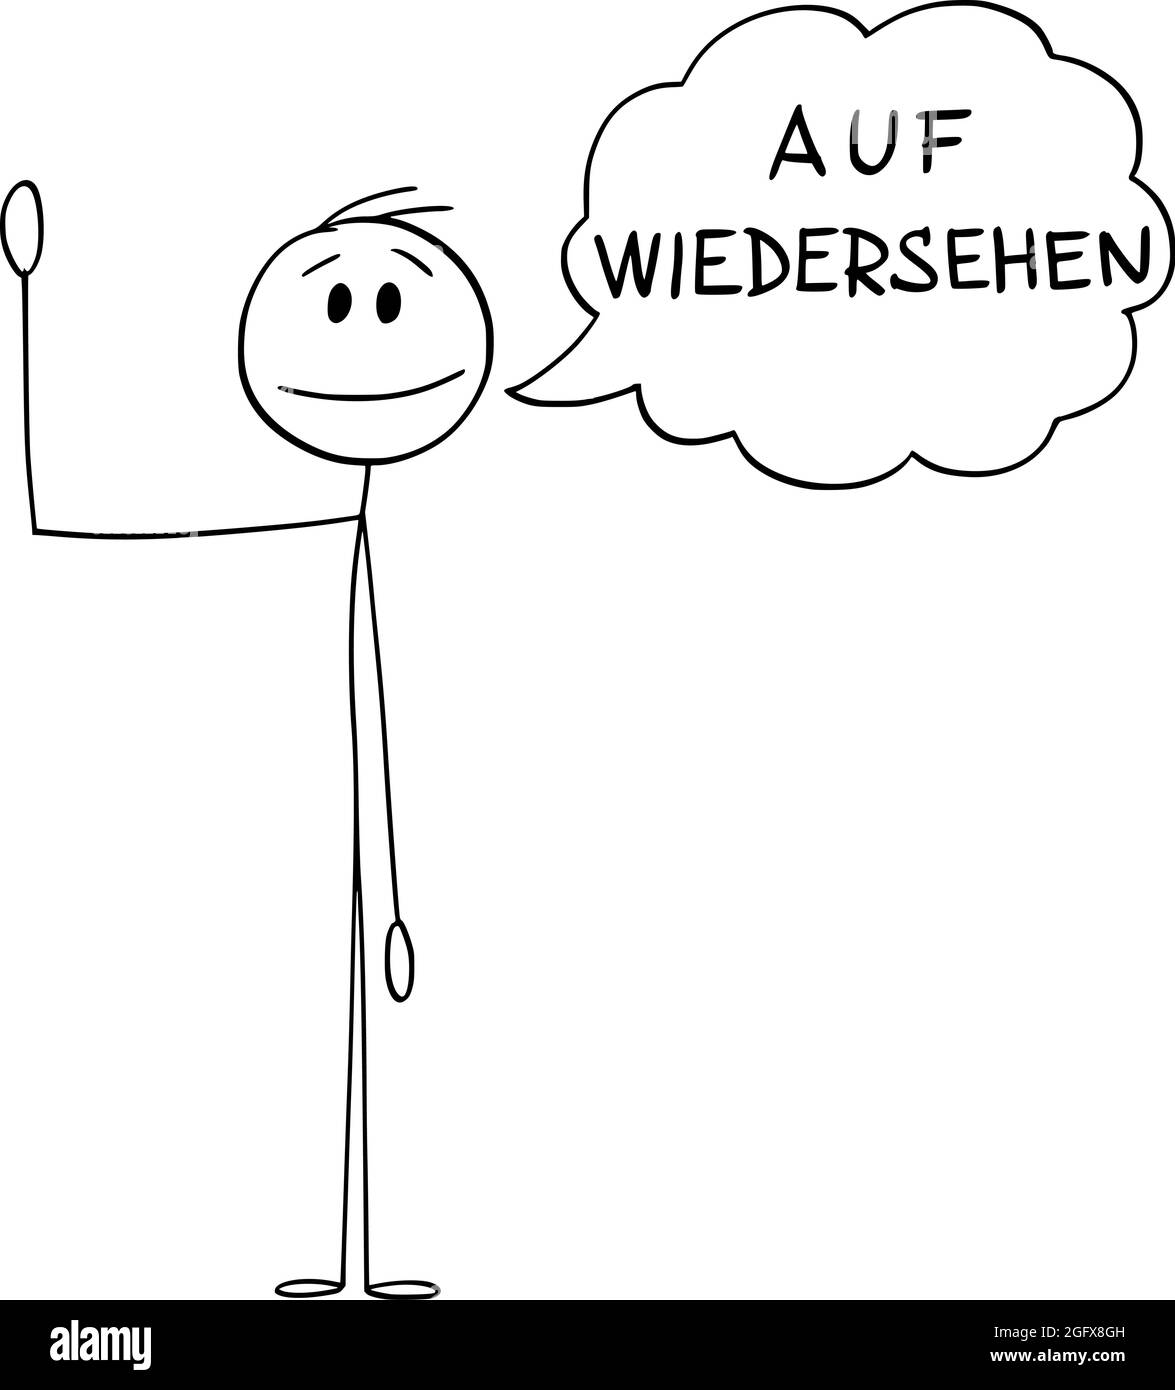 Person or Man Waving His Hand and Saying Greeting Auf Wiedersehen in German , Vector Cartoon Stick Figure Illustration Stock Vector